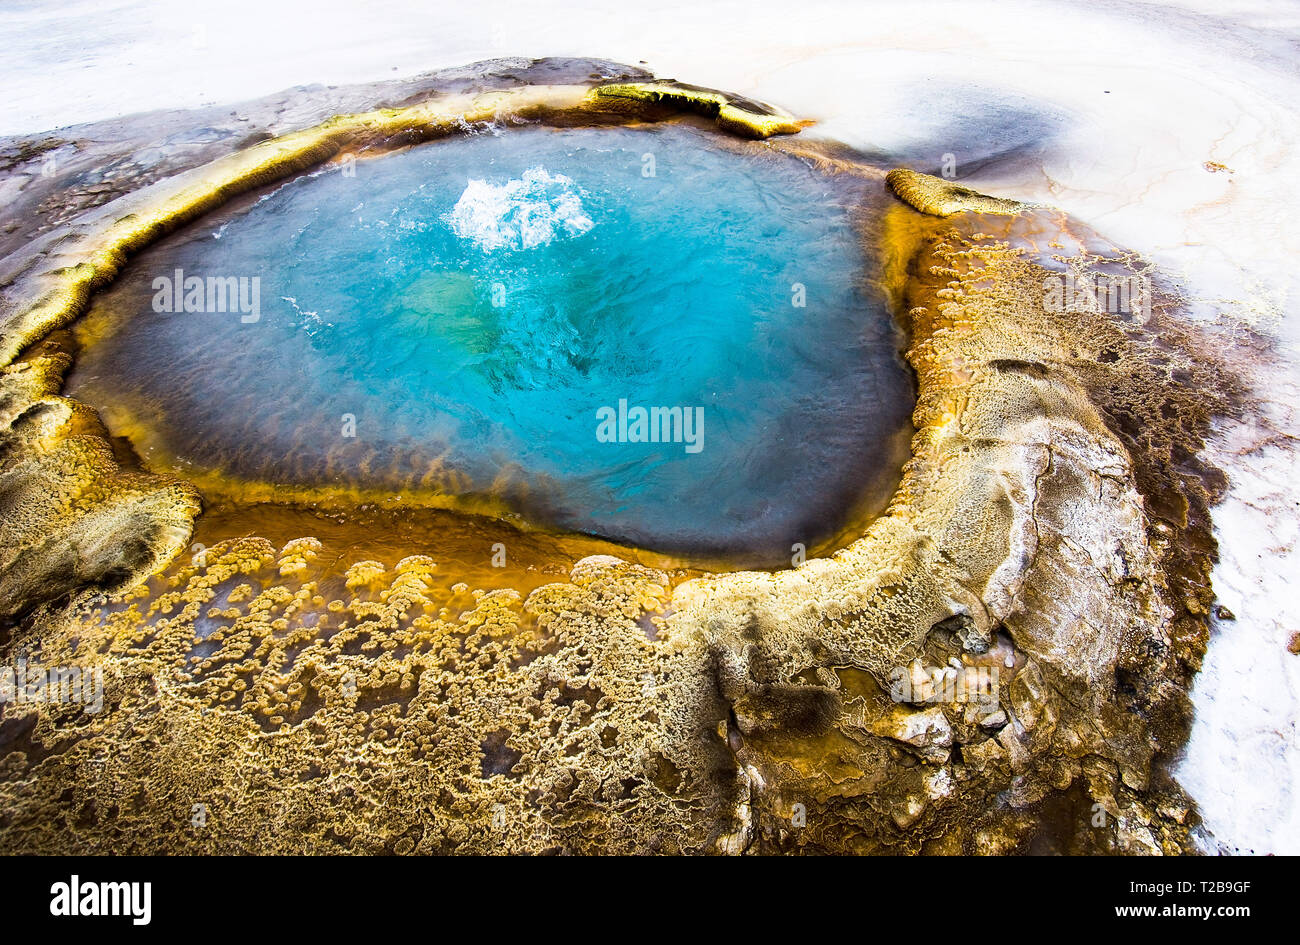 The intense blue bubbling water in the hole of a geyser in Iceland. Stock Photo